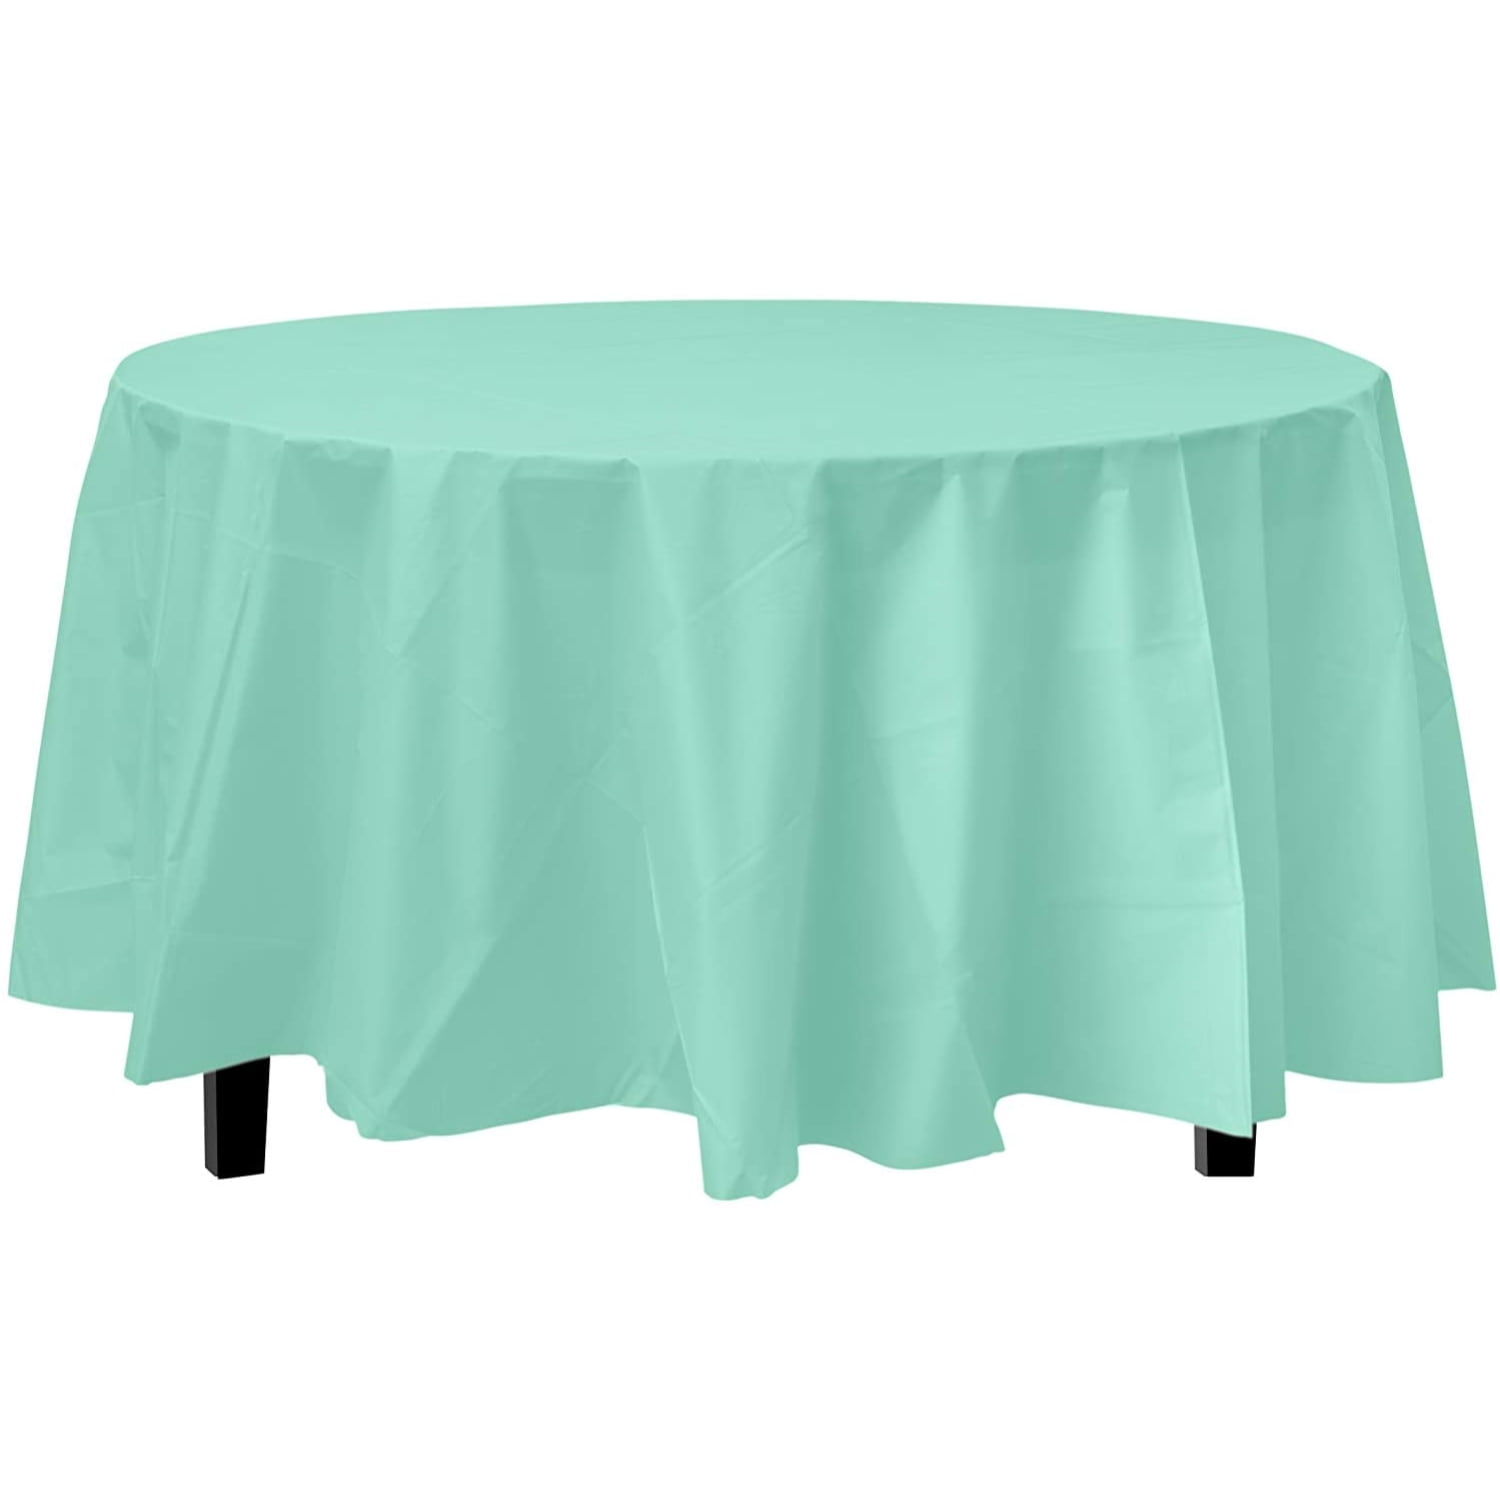 Mint Round Table Covers, White Round Table Covers Plastic